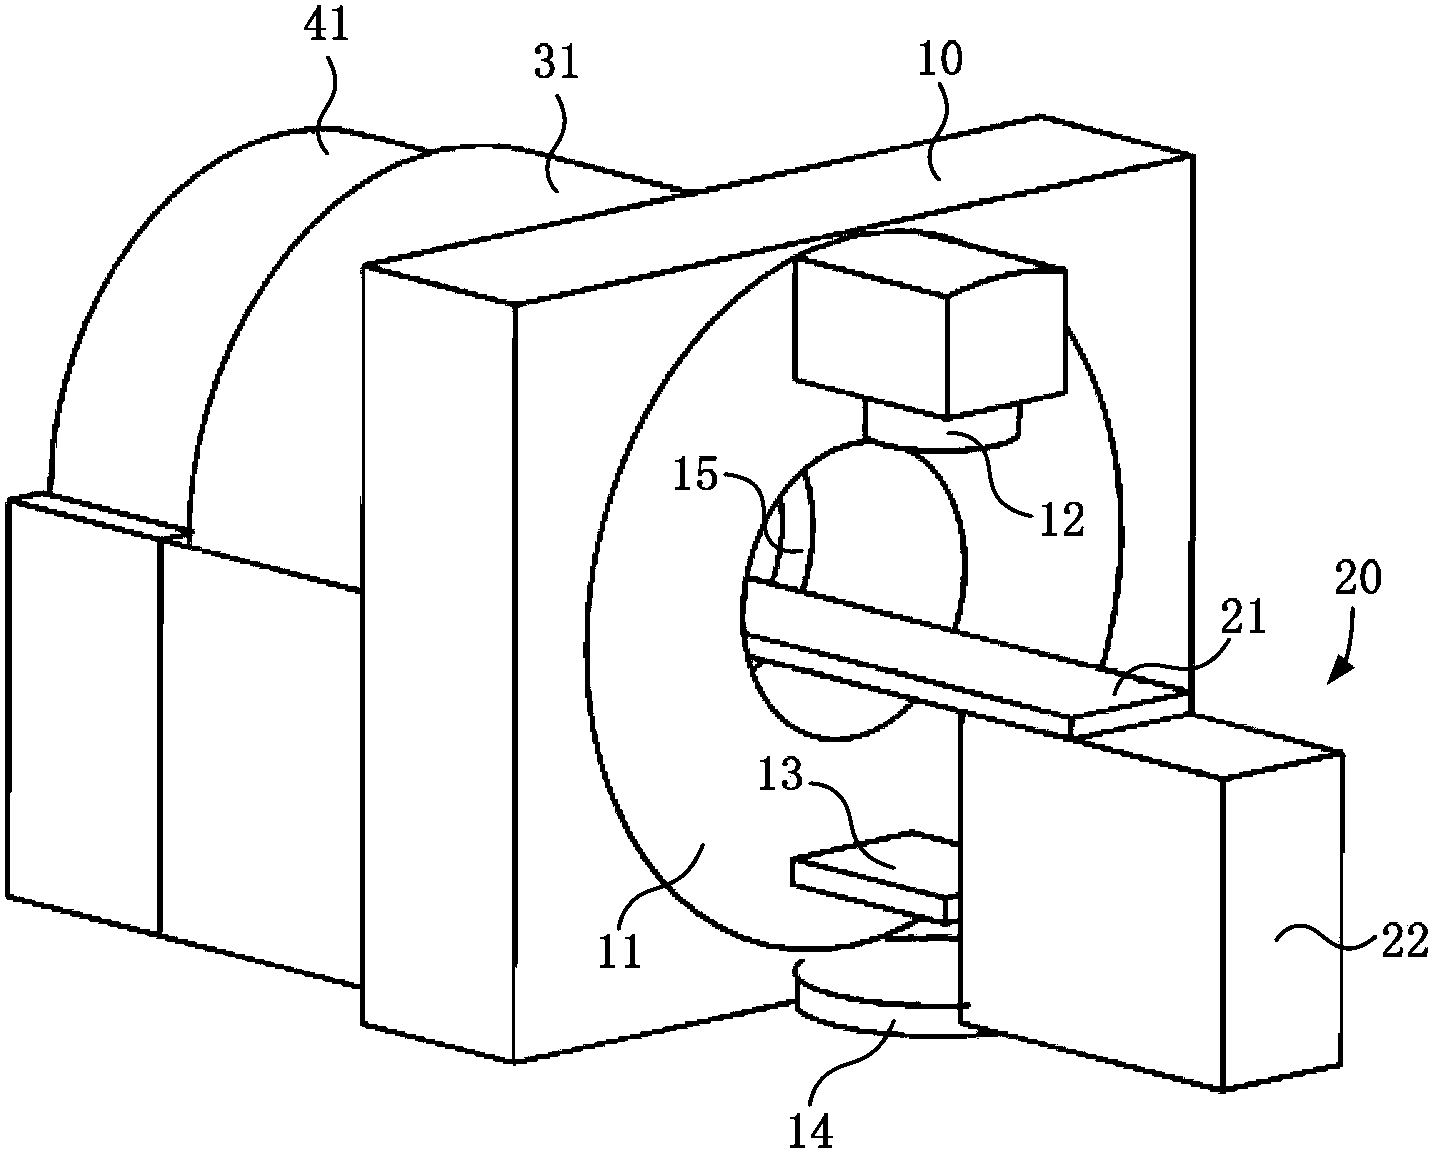 Radiotherapy device